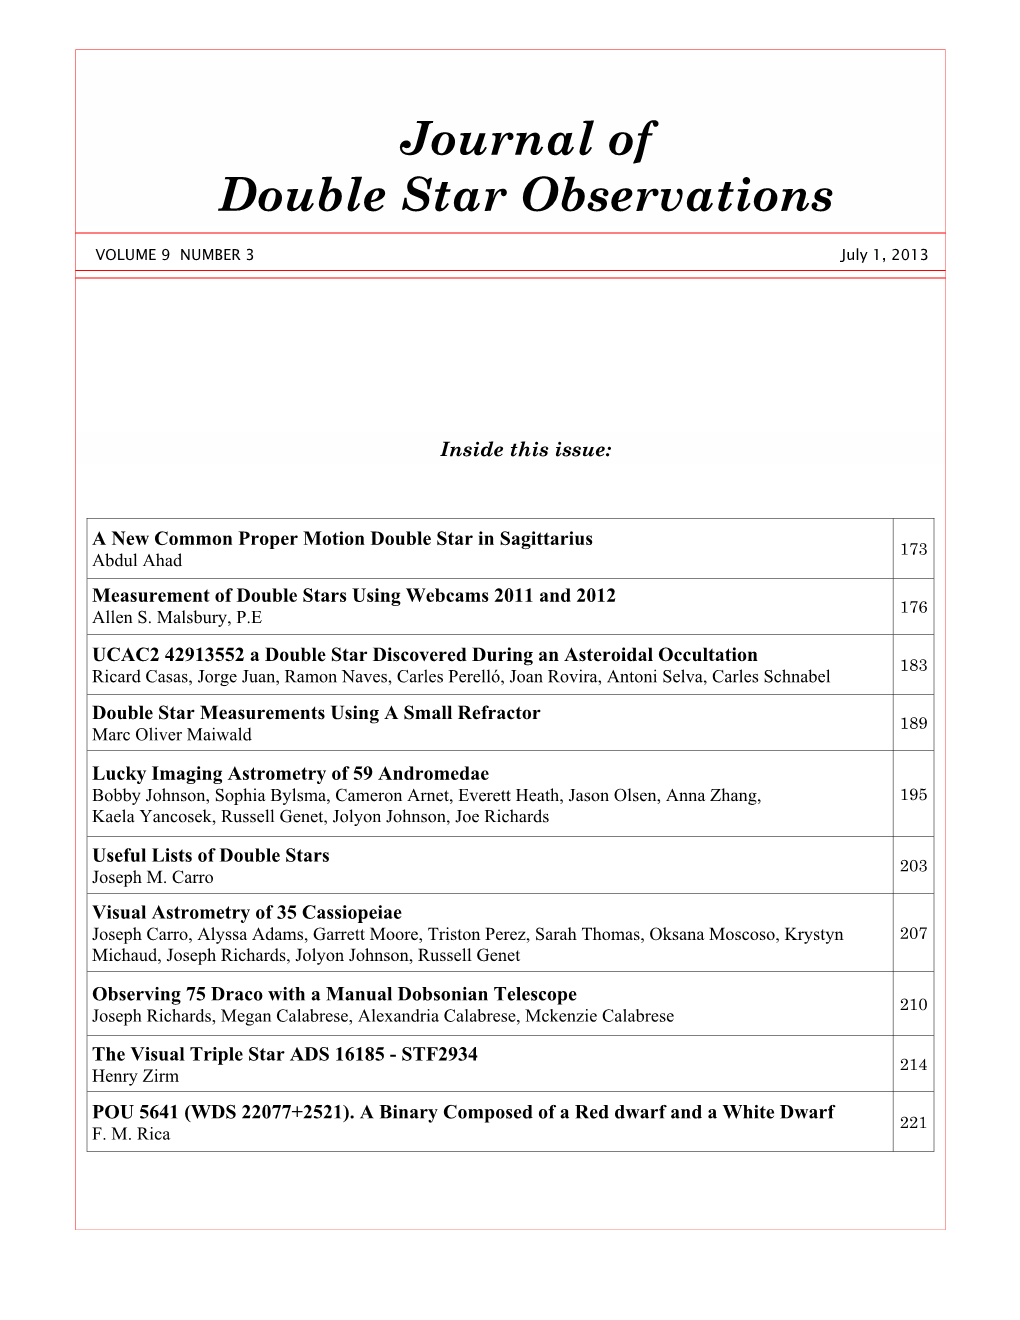 UCAC2 42913552, a Double Star Discovered During an Asteroidal Occultation